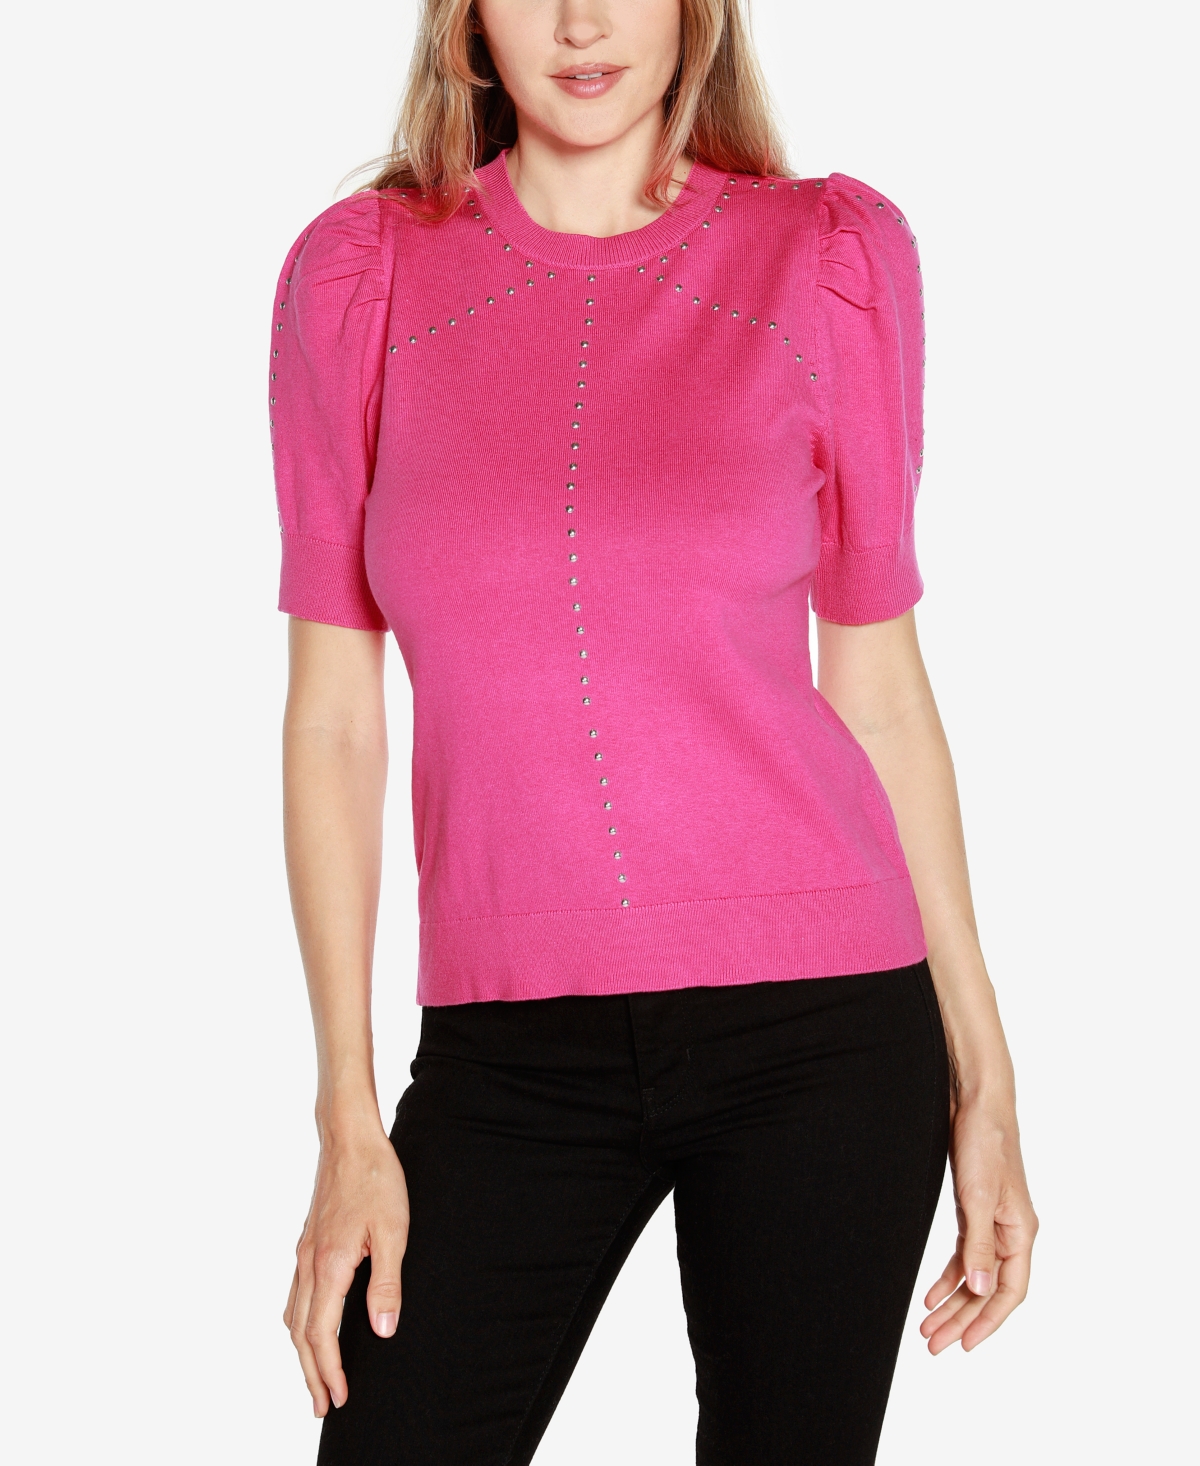 Belldini Women's Short Puff-sleeve Embellished Sweater In Roseberry